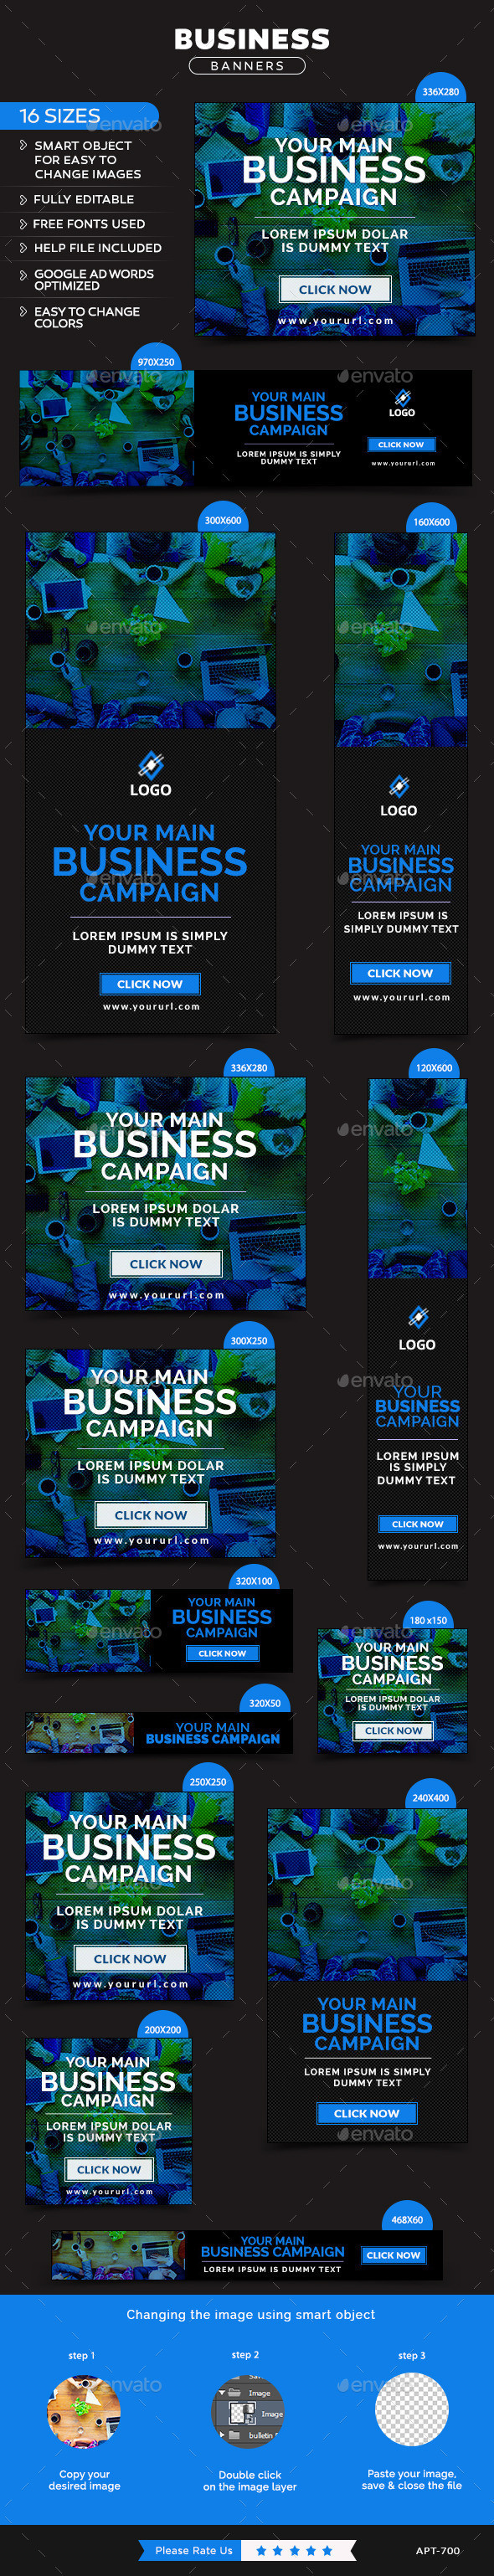 Apt 700 business 20banners preview